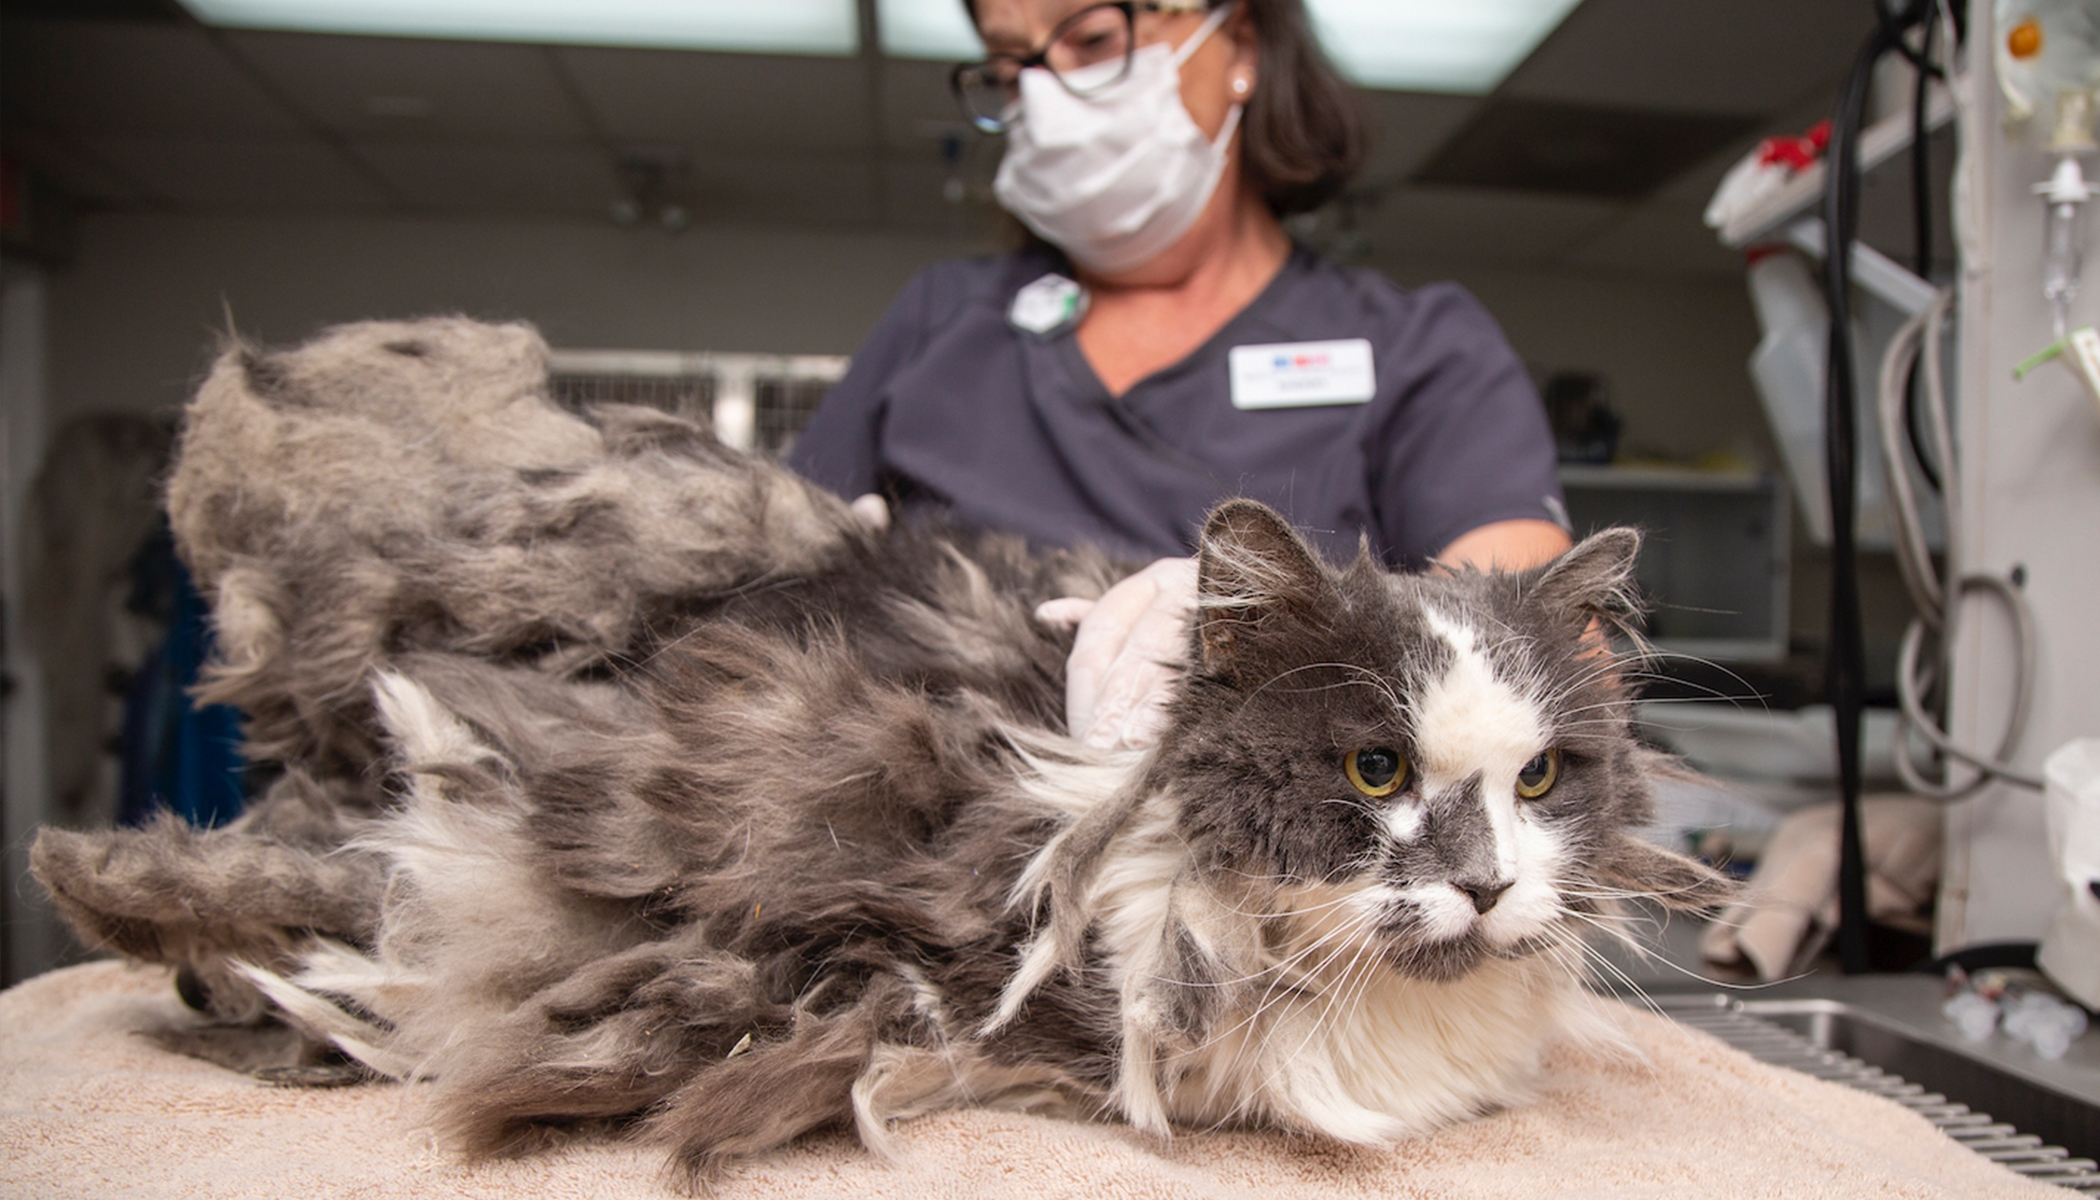 Shelter Removes 1 Lb. of Matted Fur from Abandoned Cat